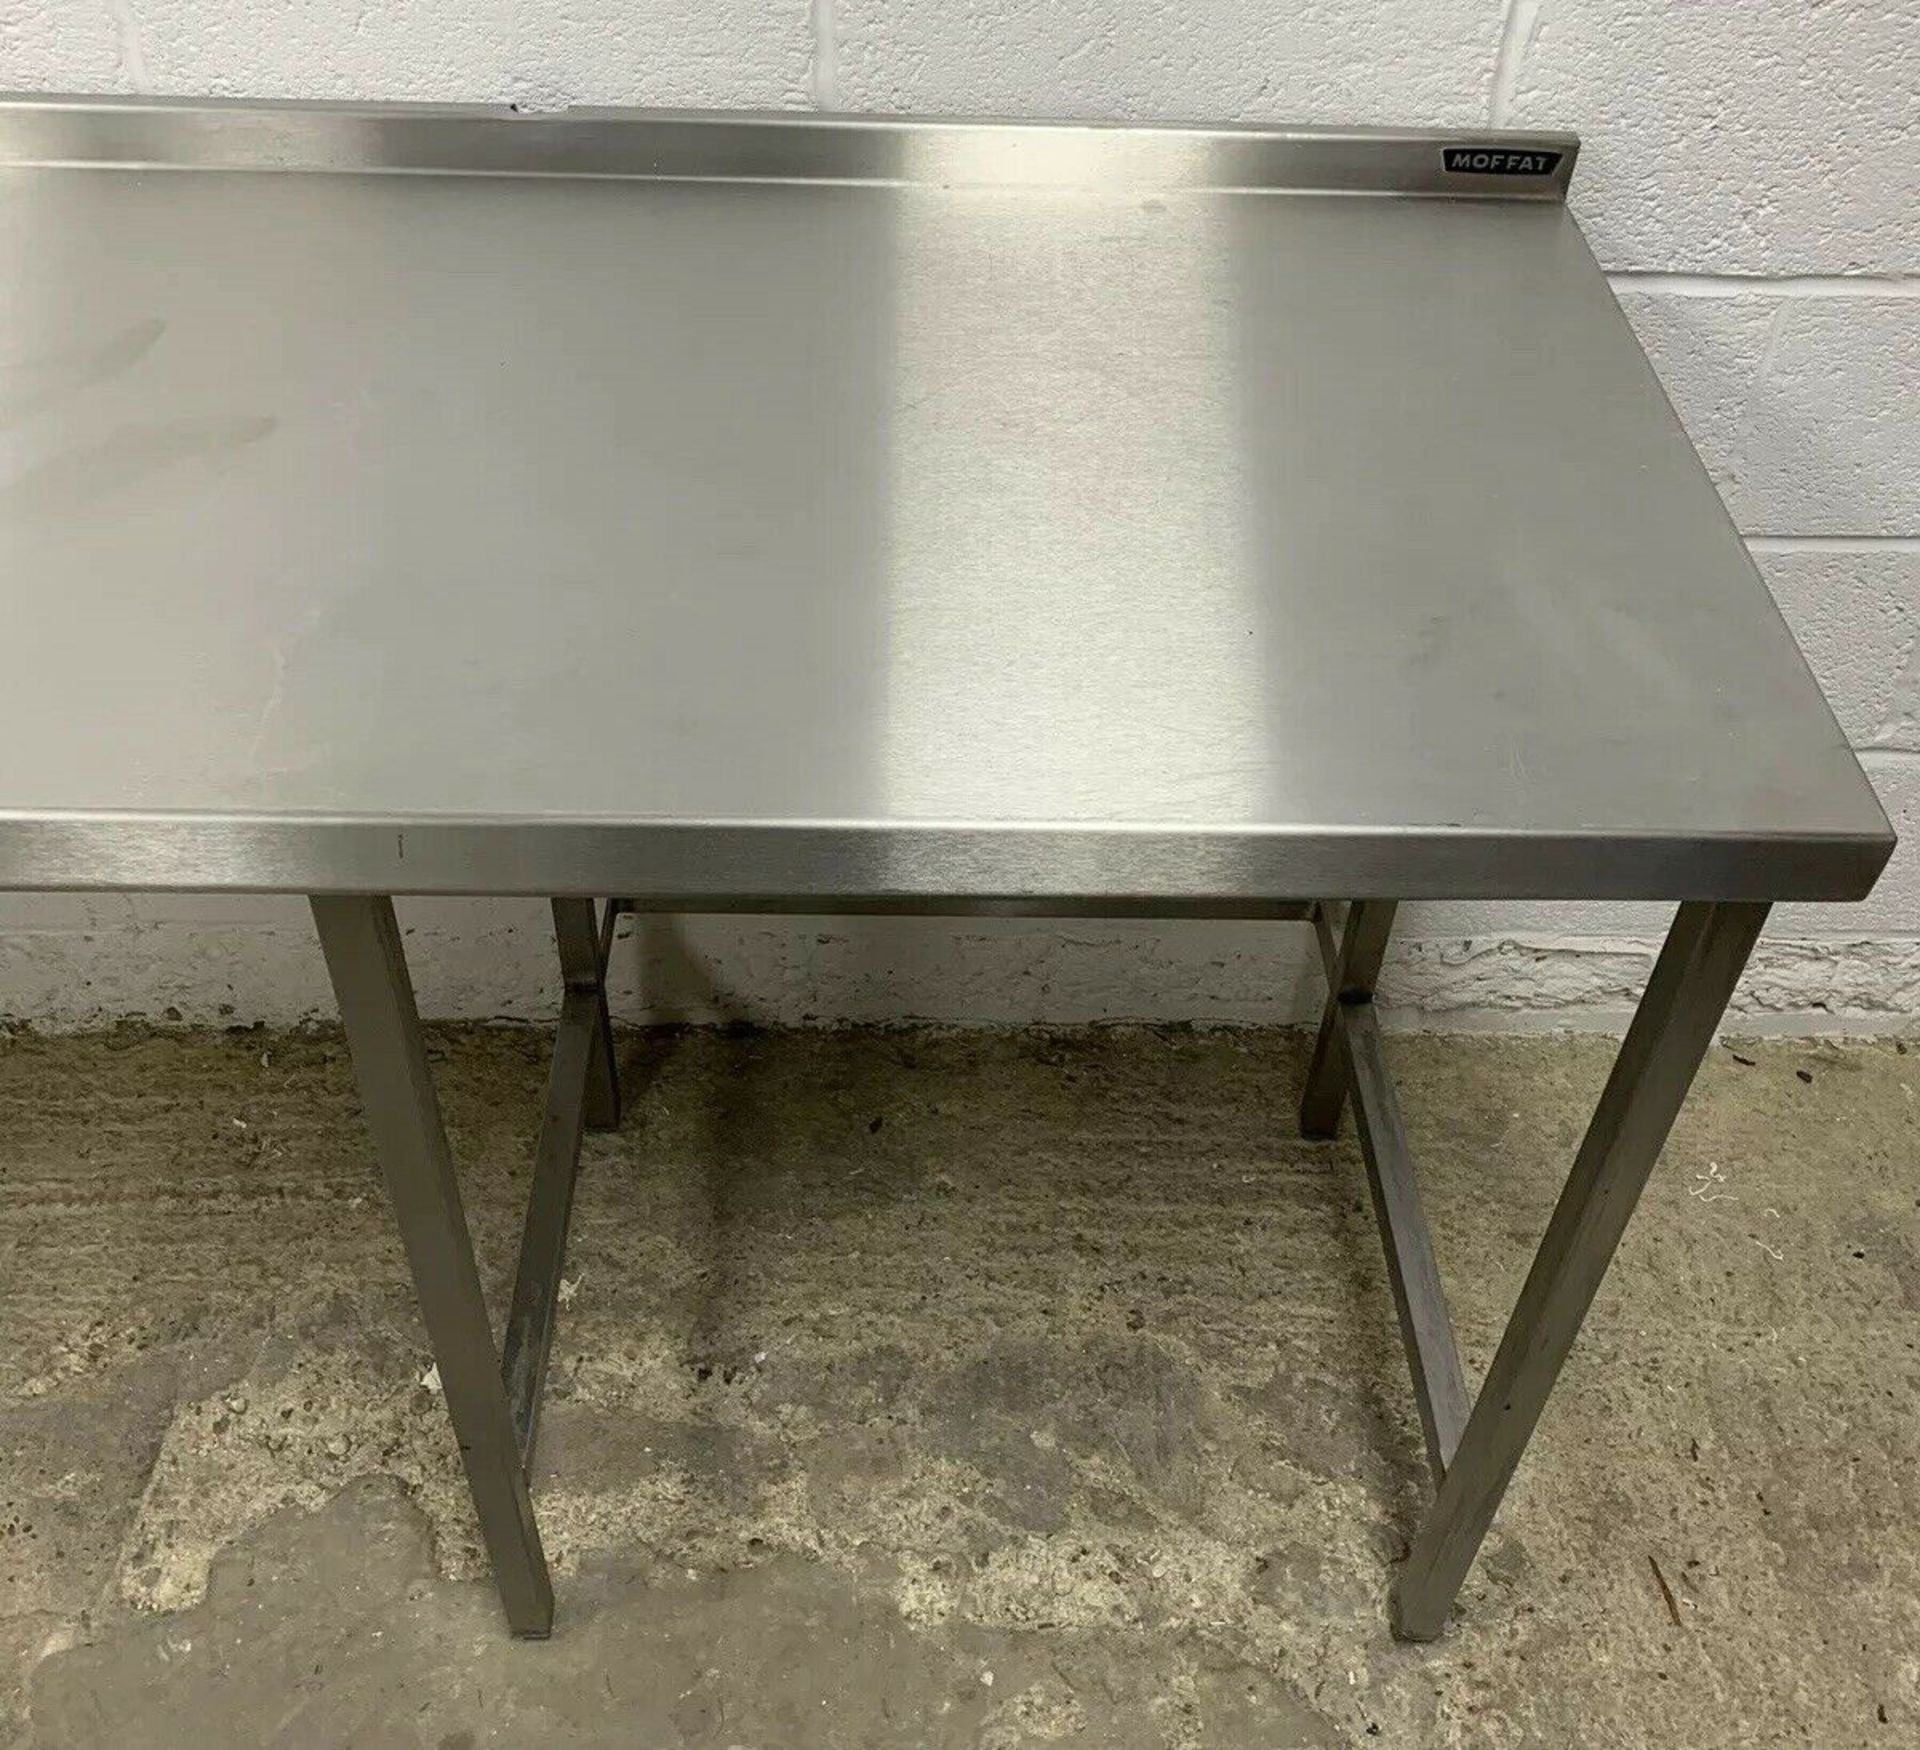 Moffat Stainless Steel Prep Table - Image 3 of 4